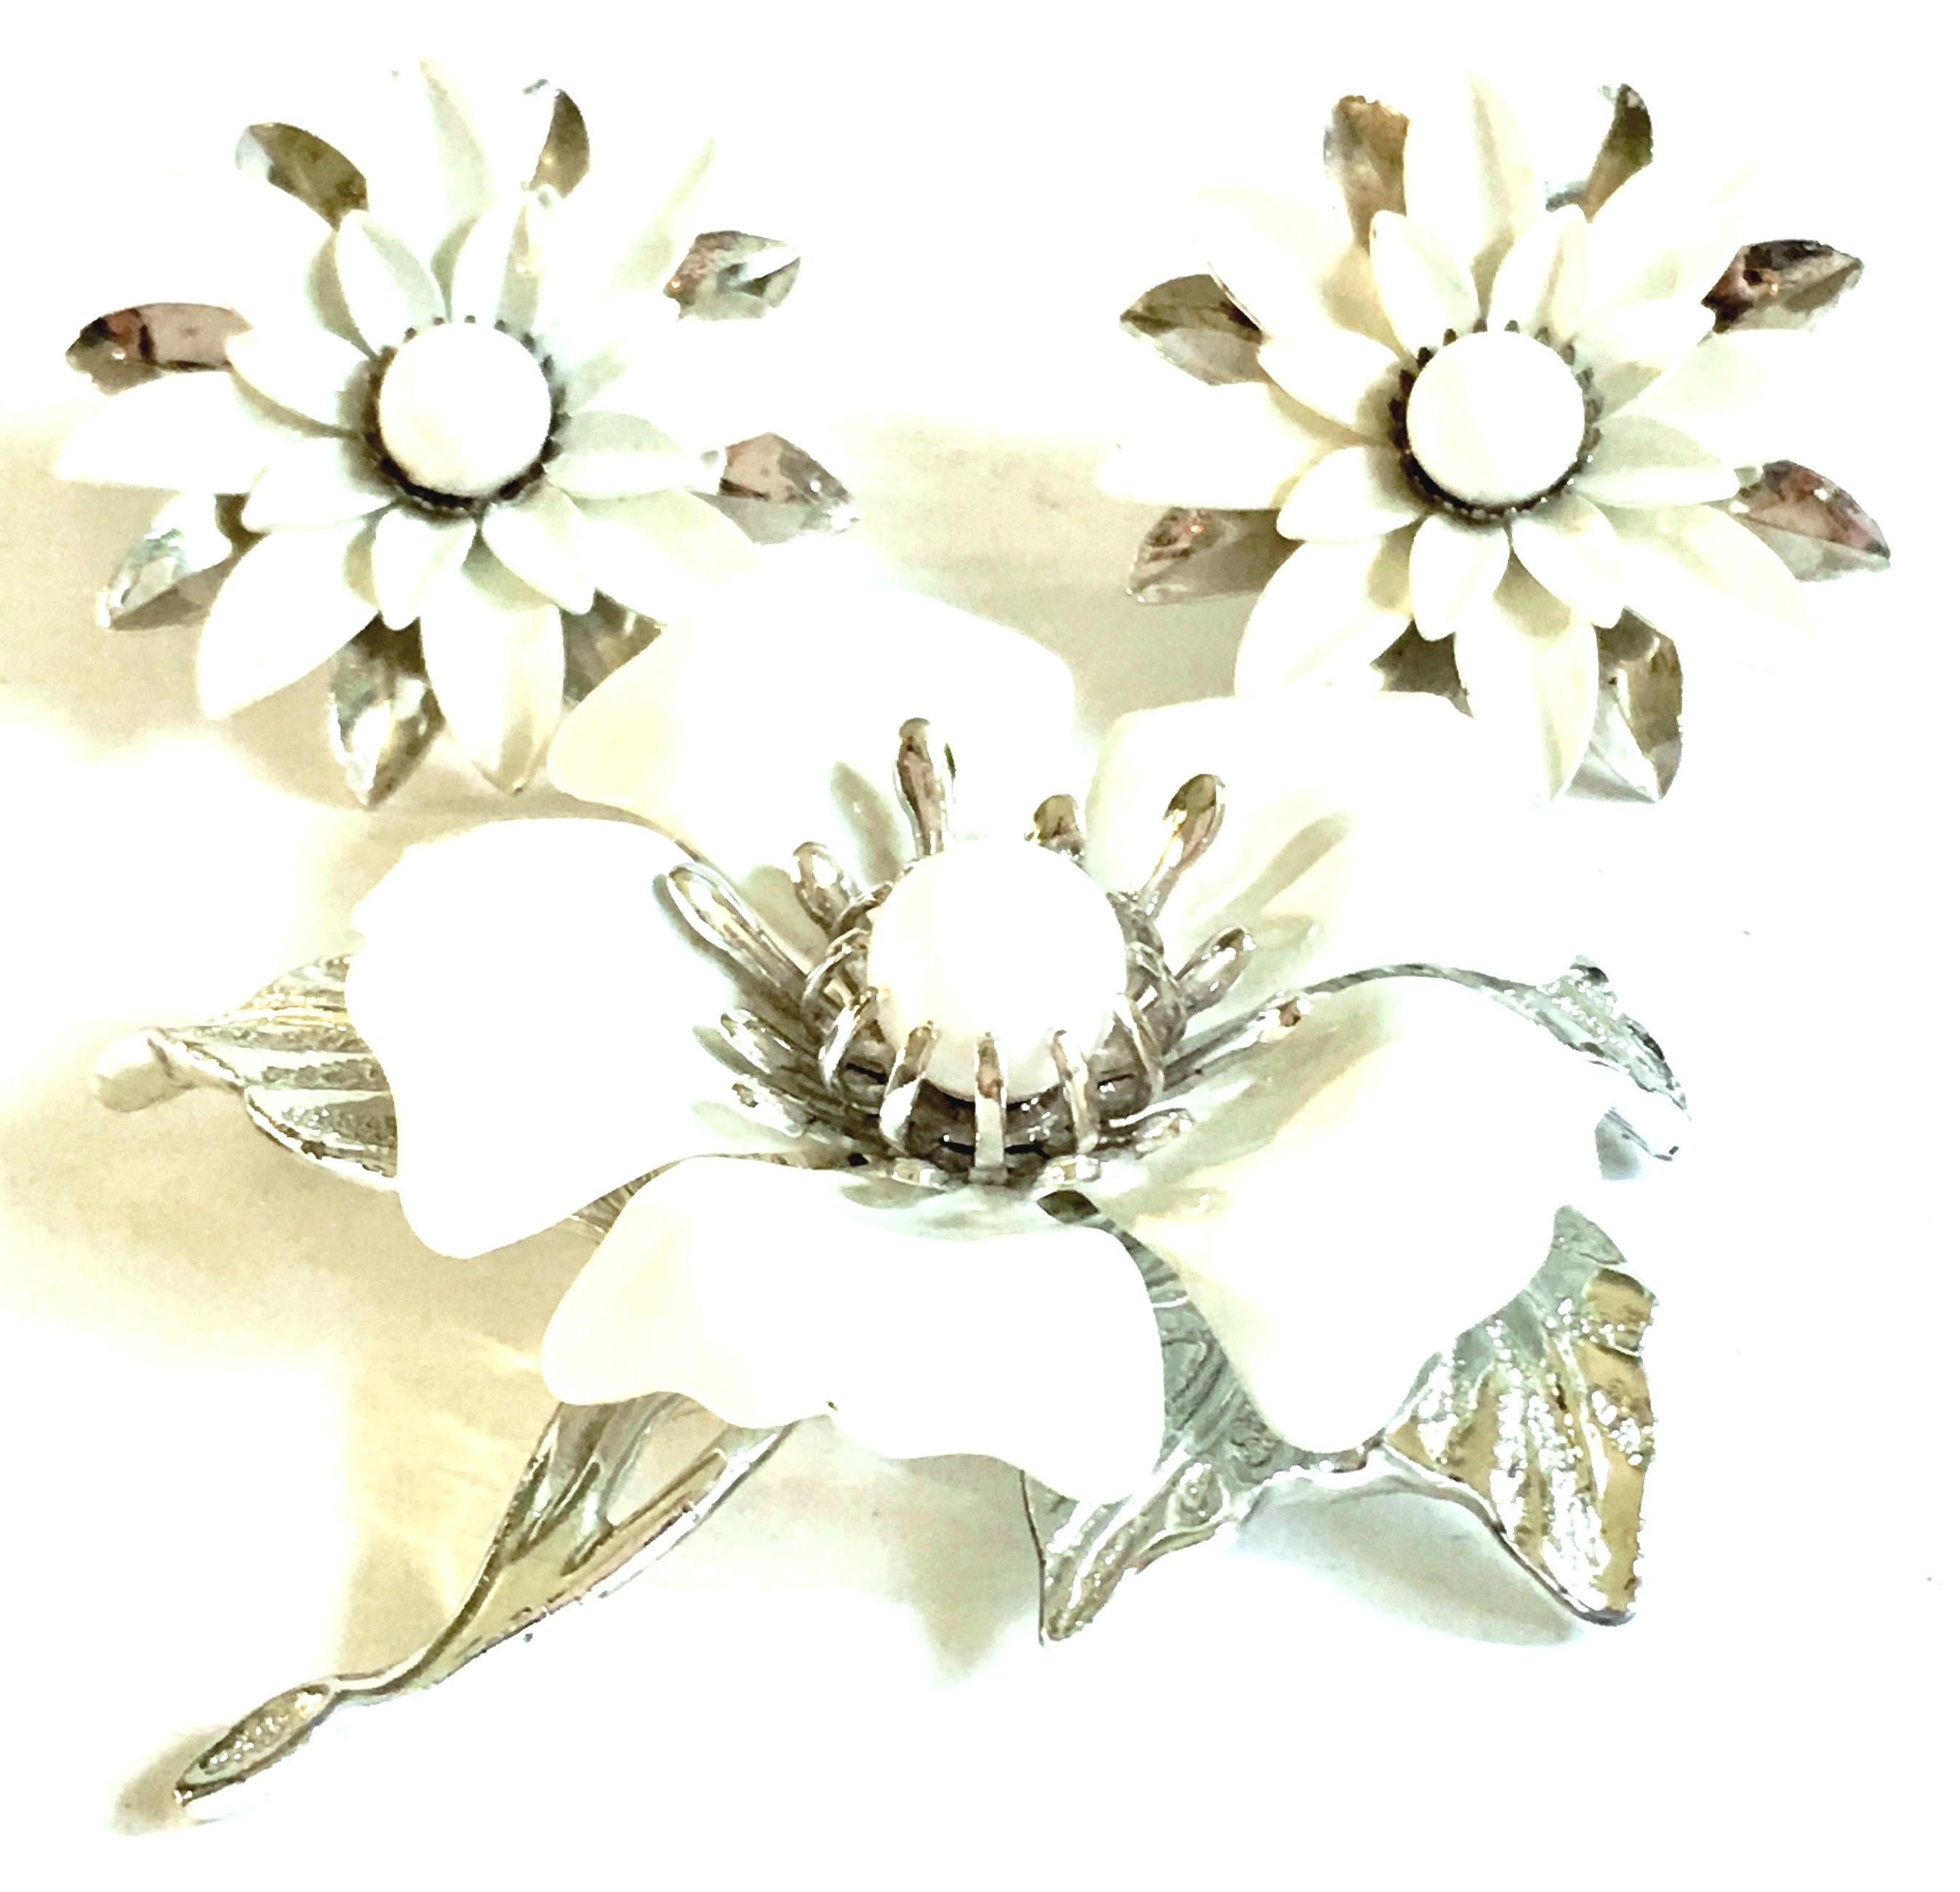 1960'S Silver Plate & Enamel Modernist Abstract Dimensional Big Flower Brooch & Earrings By, Sarah Coventry. Features bright white enamel over silver plate metal. Each of the three pieces are signed on the underside, Sarah Cov.
The clip style